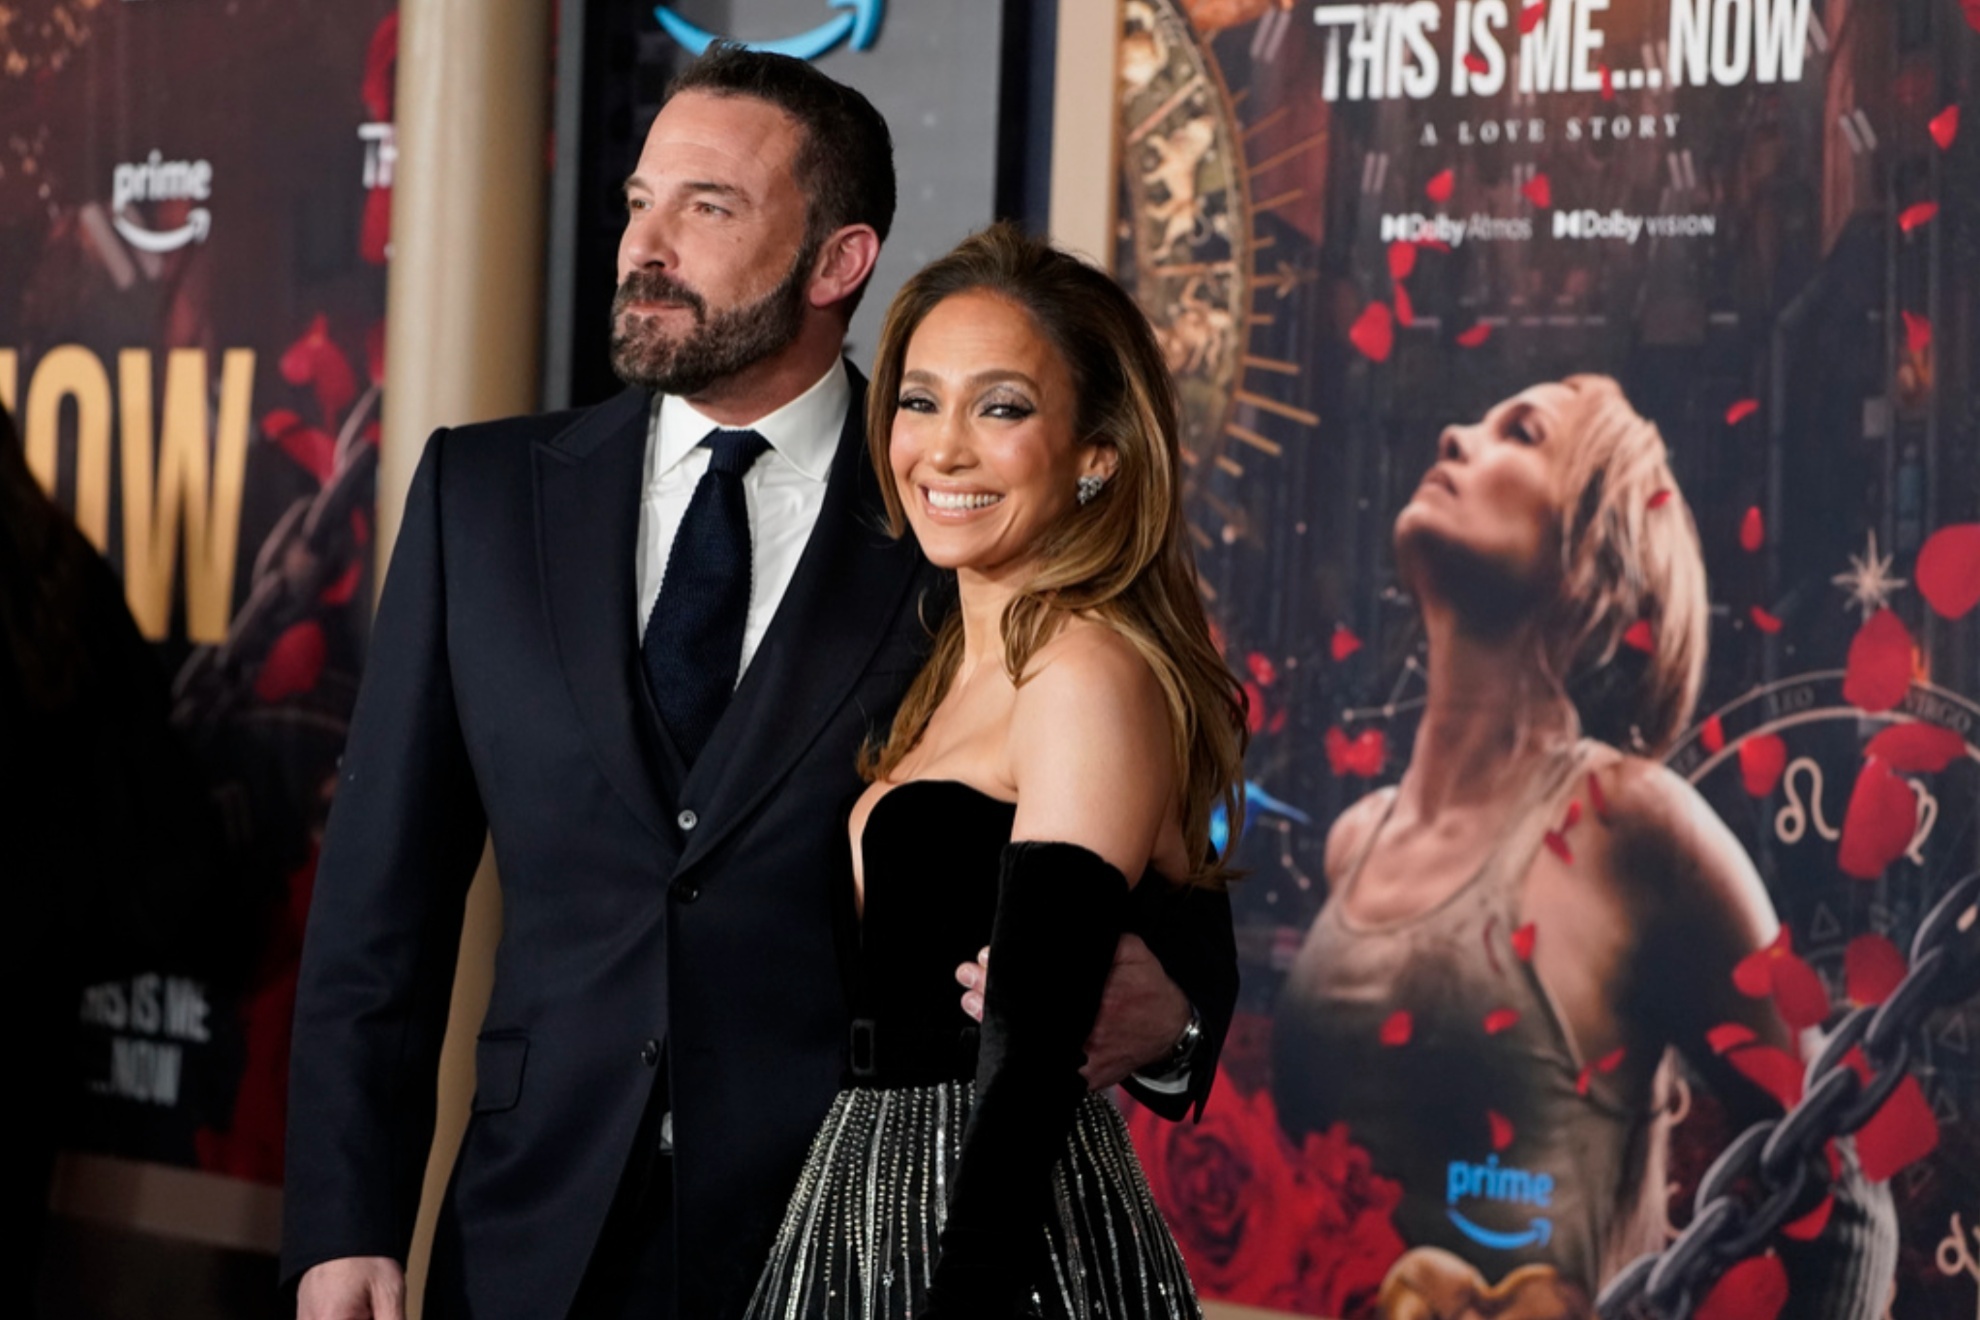 Ben Affleck and Jennifer Lopez arrive at the premiere of This Is Me... Now: A Love Story